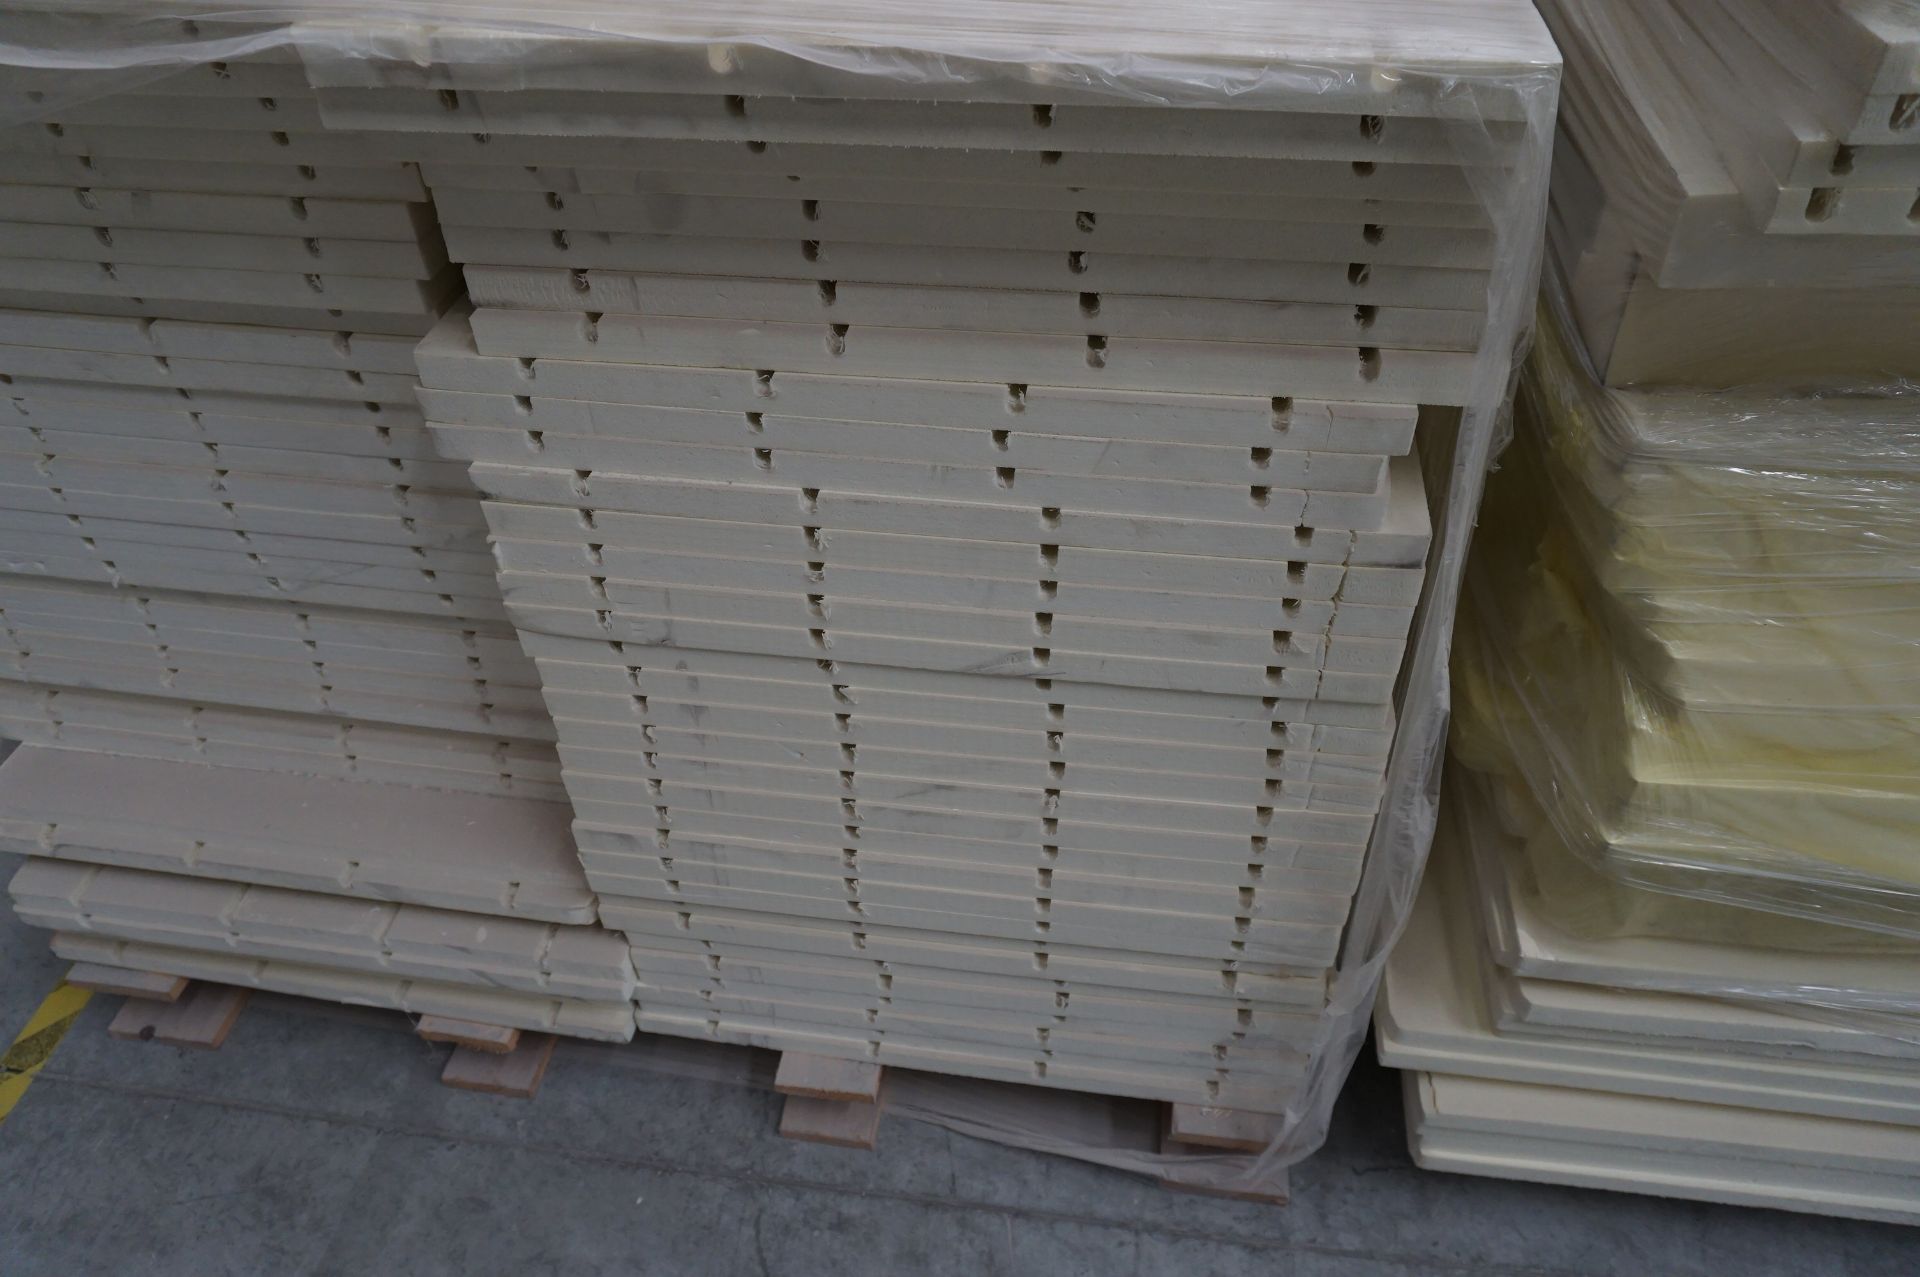 Quiet, Step T4 floor insulation on two pallets, approx. 700 sheets, 1190 x 593mm - Image 5 of 12